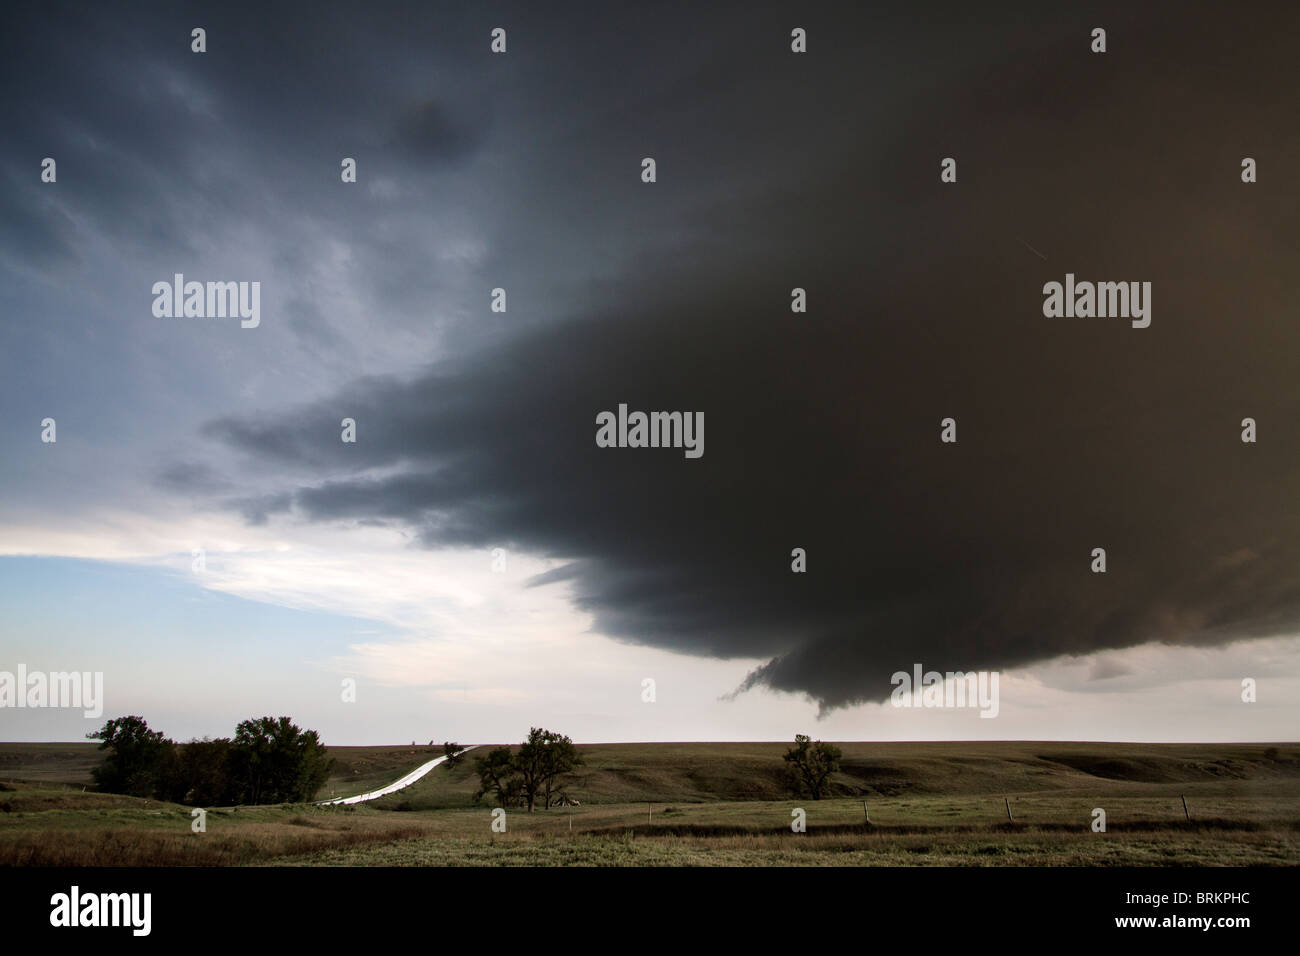 A supercellular thunderstorm with a wall cloud and a hint of a funnel cloud in Kansas, May 23, 2010. Stock Photo